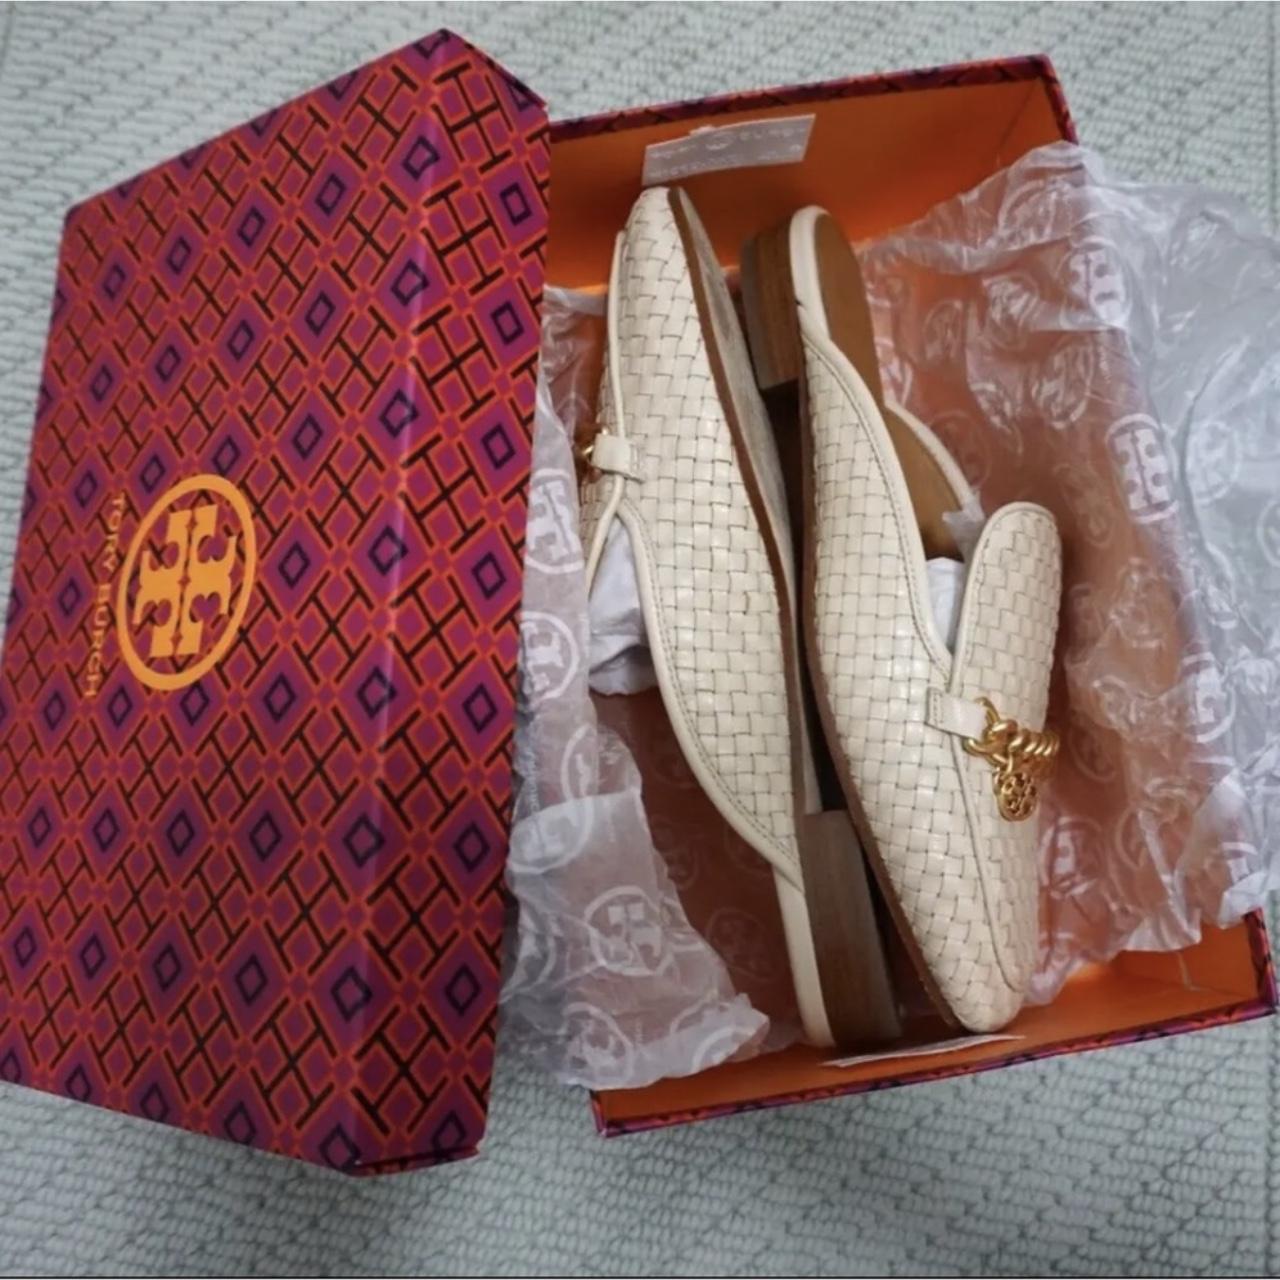 New Arrivals: Tory Burch New Collection From $298